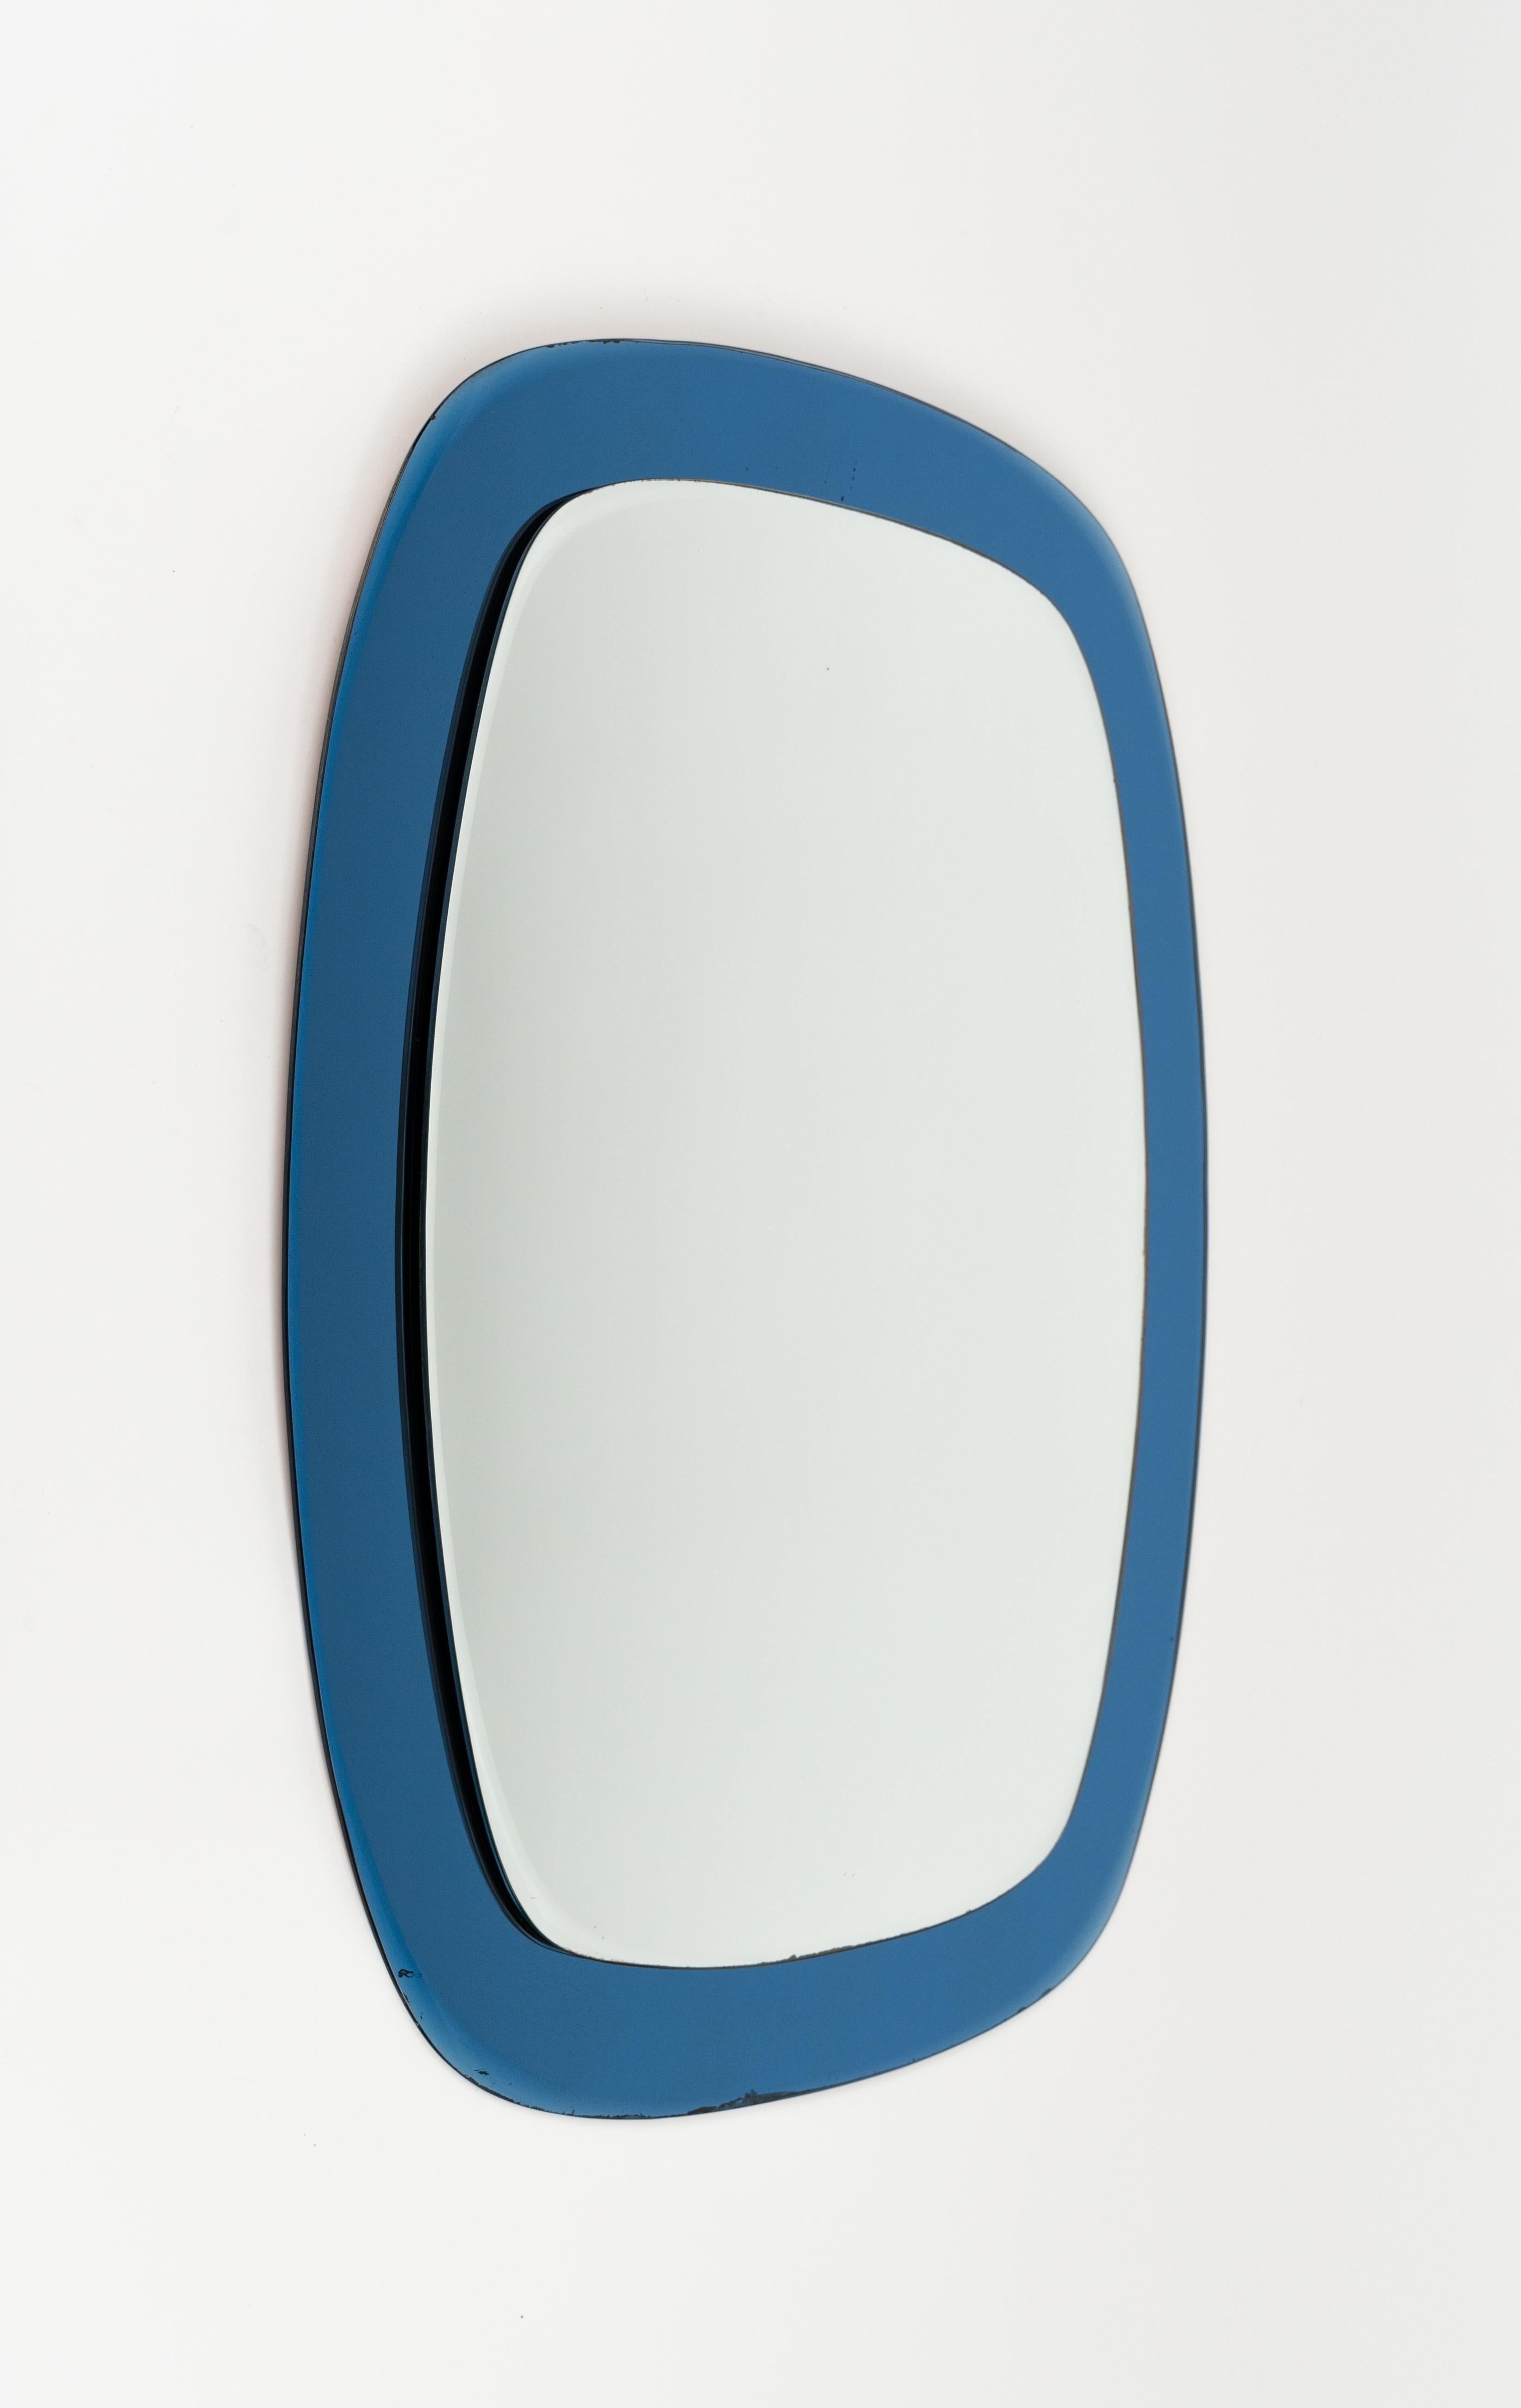 Italian Midcentury Cristal Art Oval Wall Mirror with Blue Frame, Italy 1960s For Sale